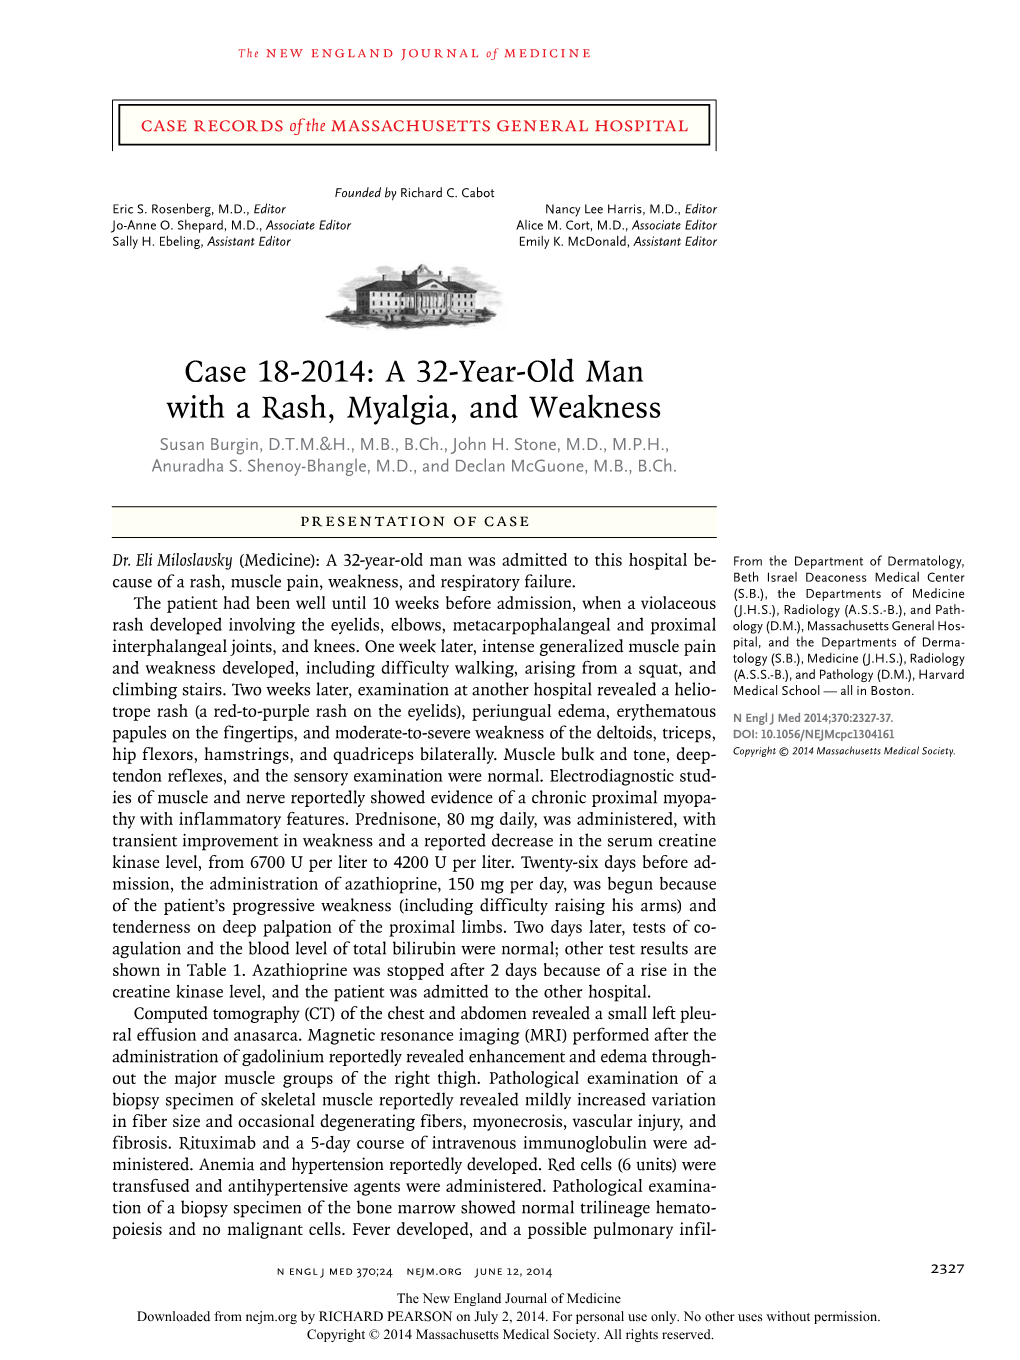 Case 18-2014: a 32-Year-Old Man with a Rash, Myalgia, and Weakness Susan Burgin, D.T.M.&H., M.B., B.Ch., John H